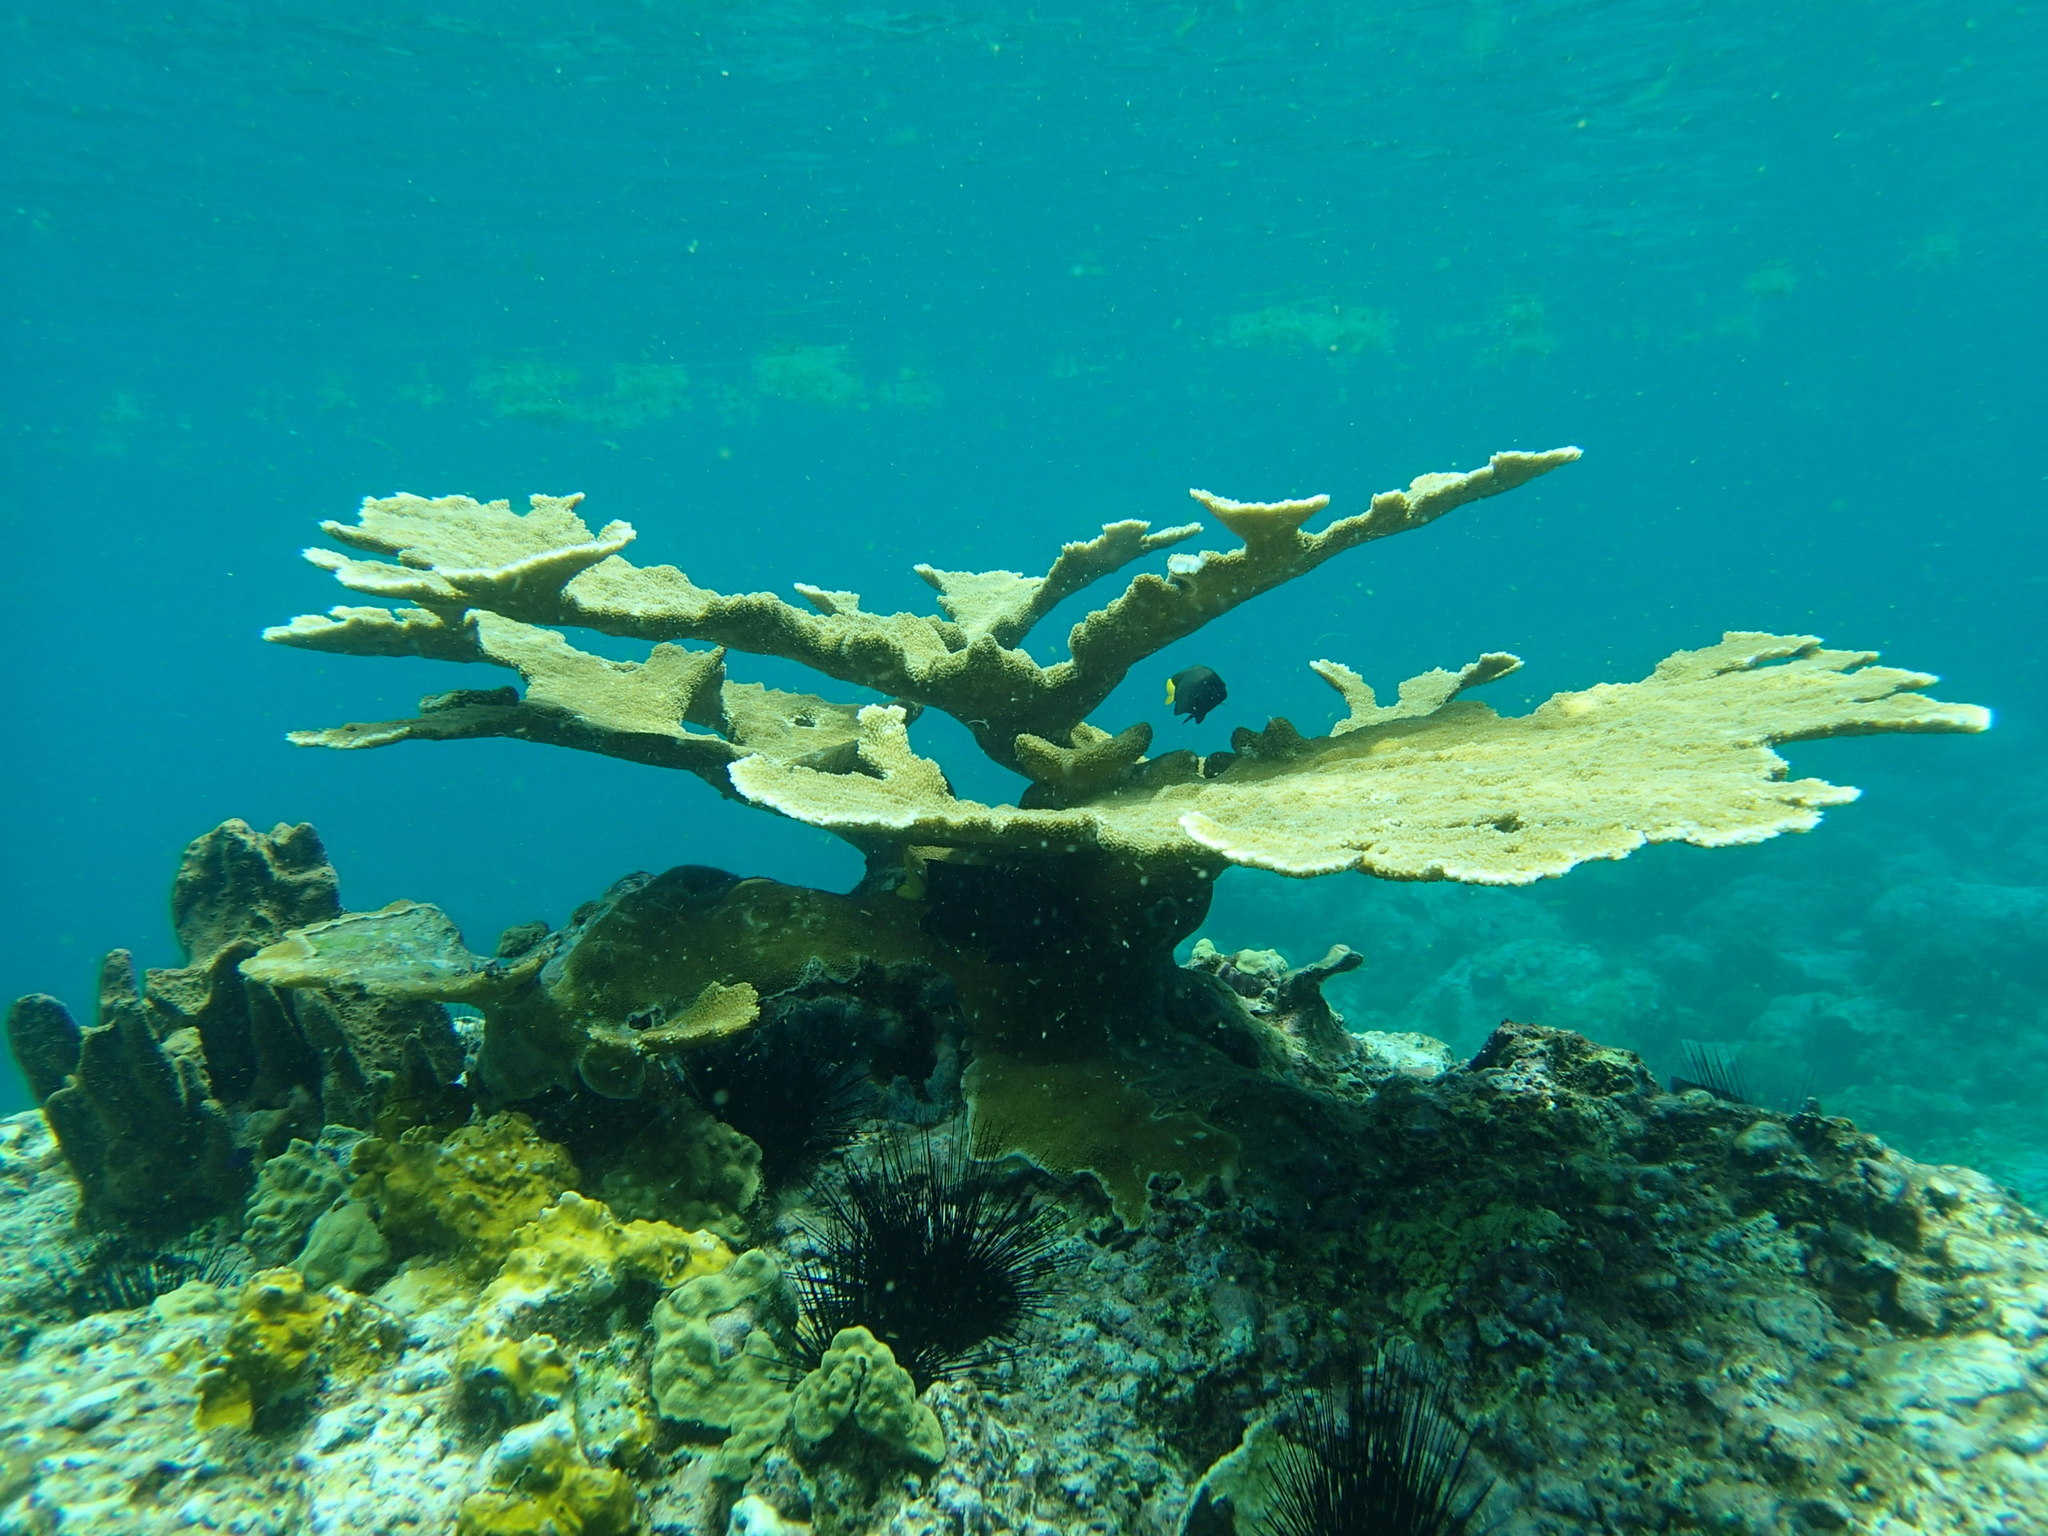 Elkhorn coral - Wikipedia